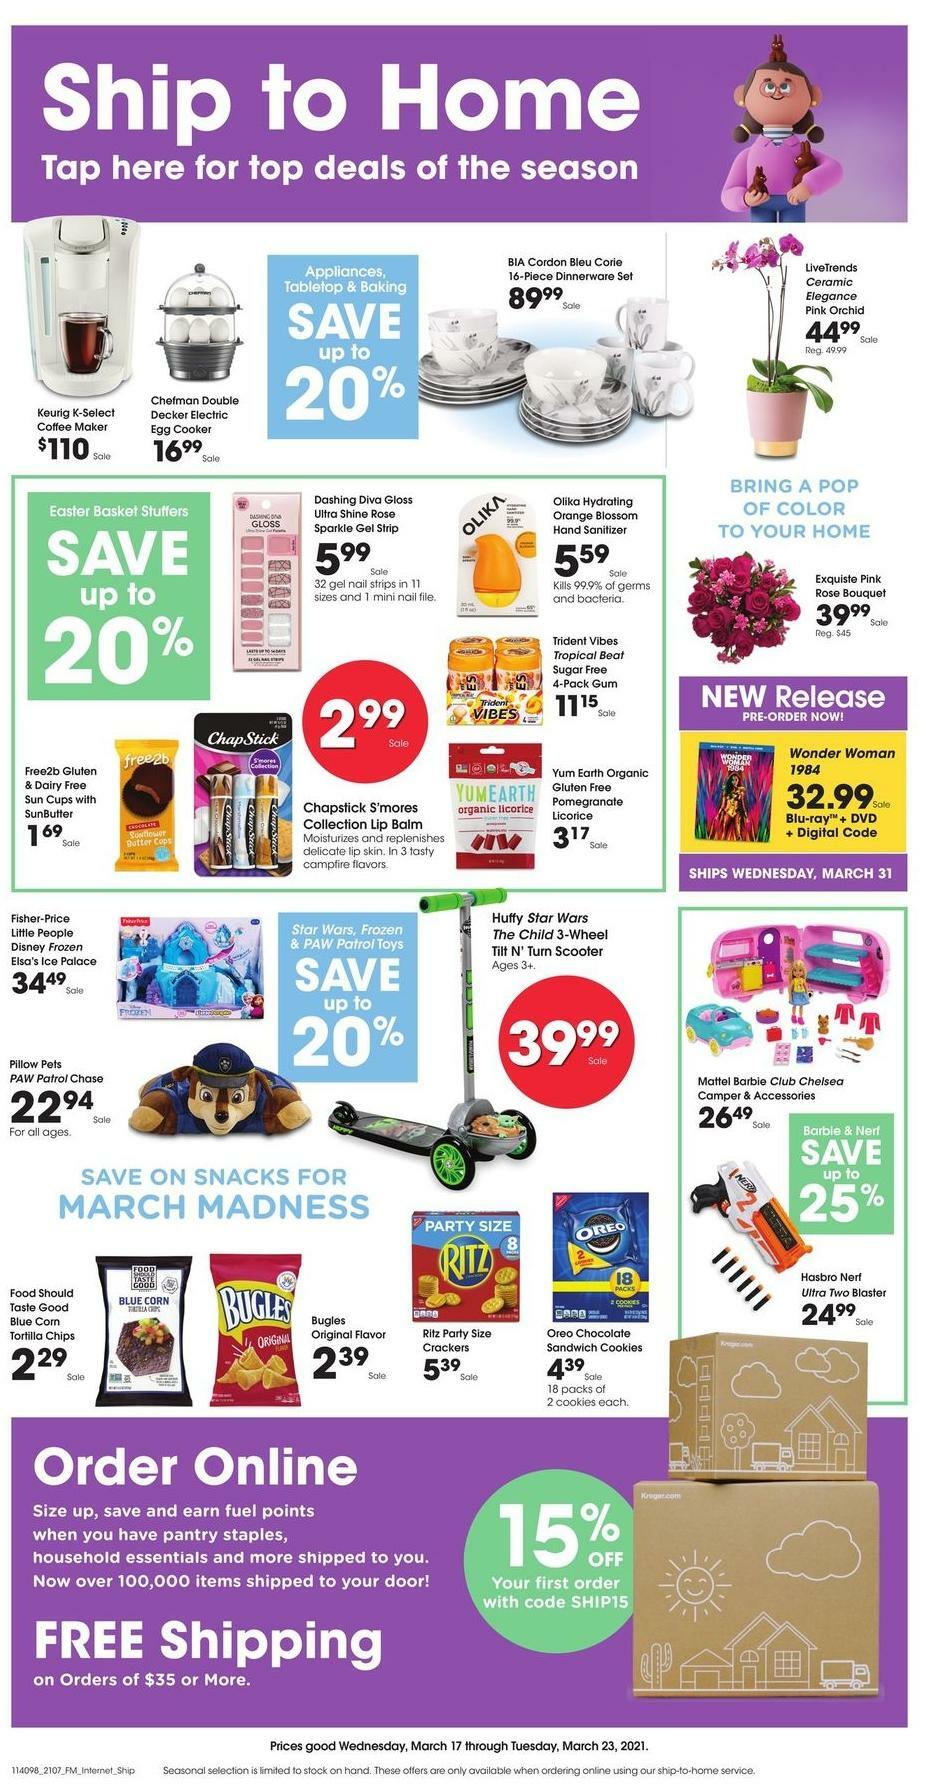 Kroger Ship to Home Weekly Ad from March 17